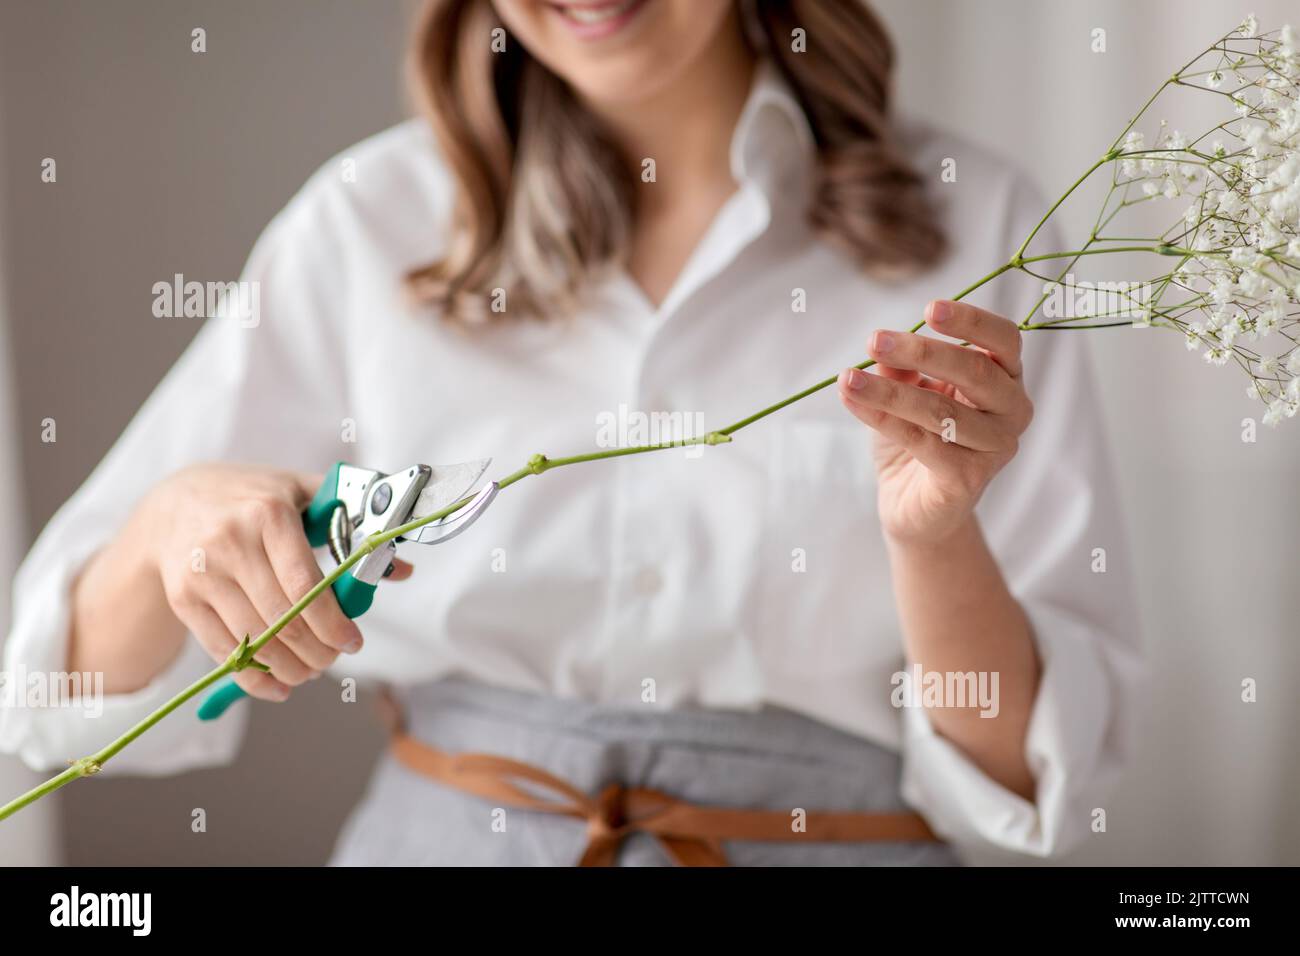 woman cutting flower stem with pruning shears Stock Photo